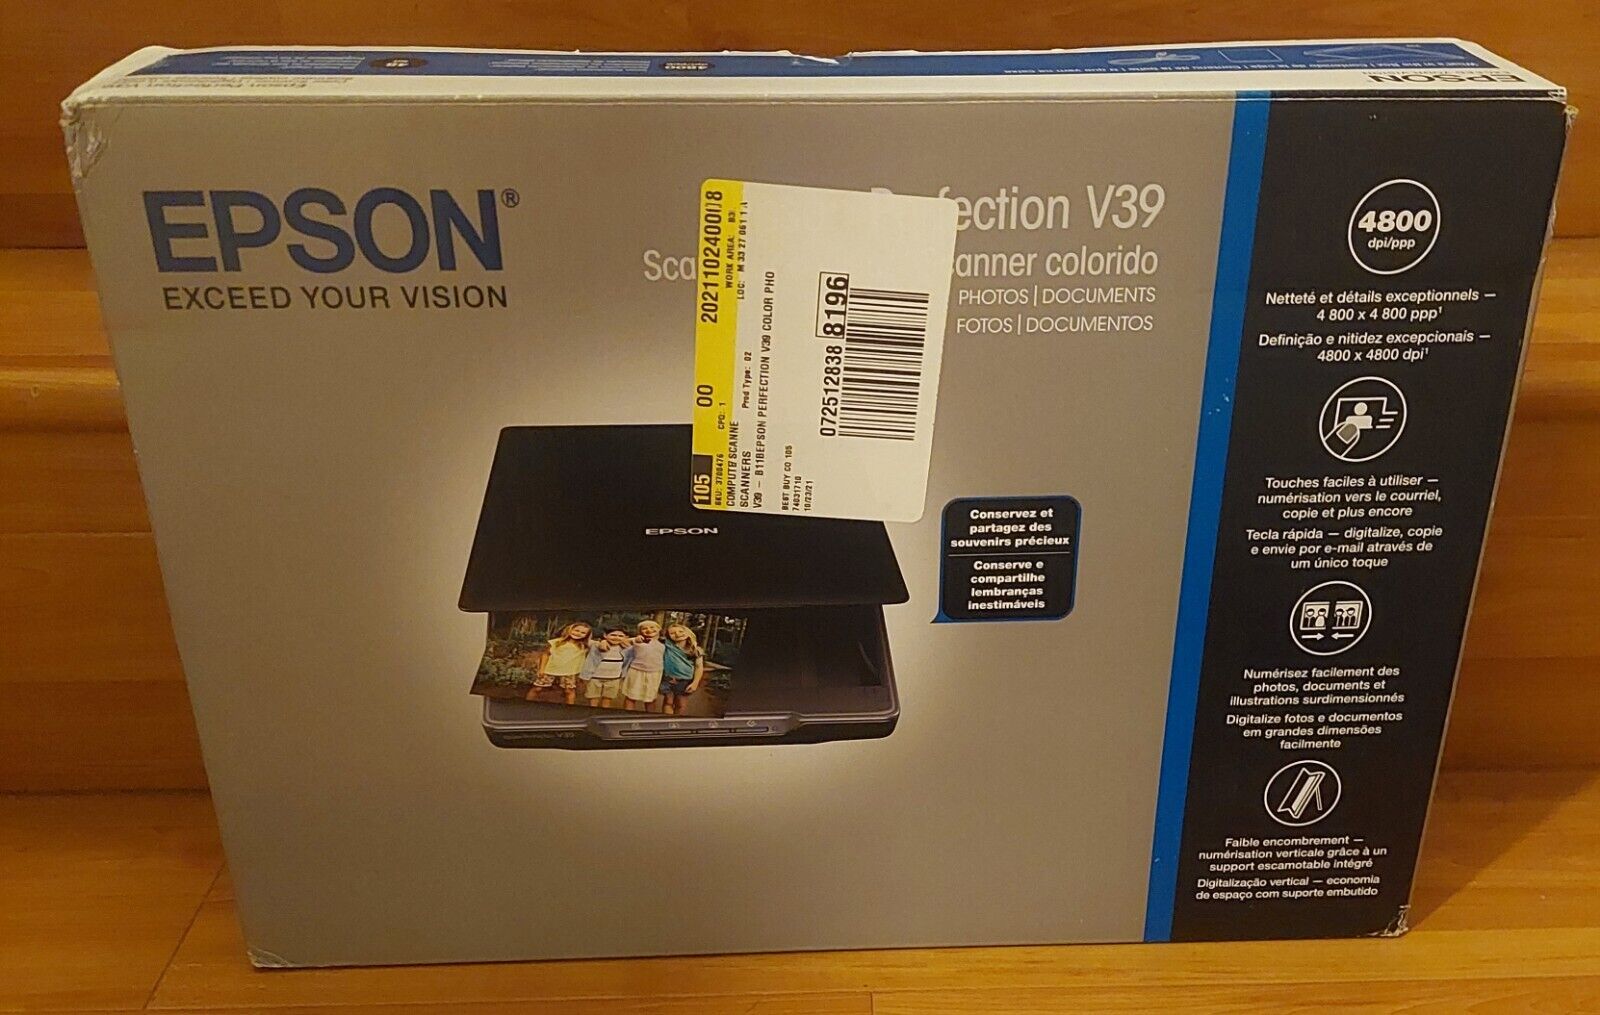 ELECTRONICS Epson Perfection V39  Scanner New Open Box (TESTED WORKS)  READ 